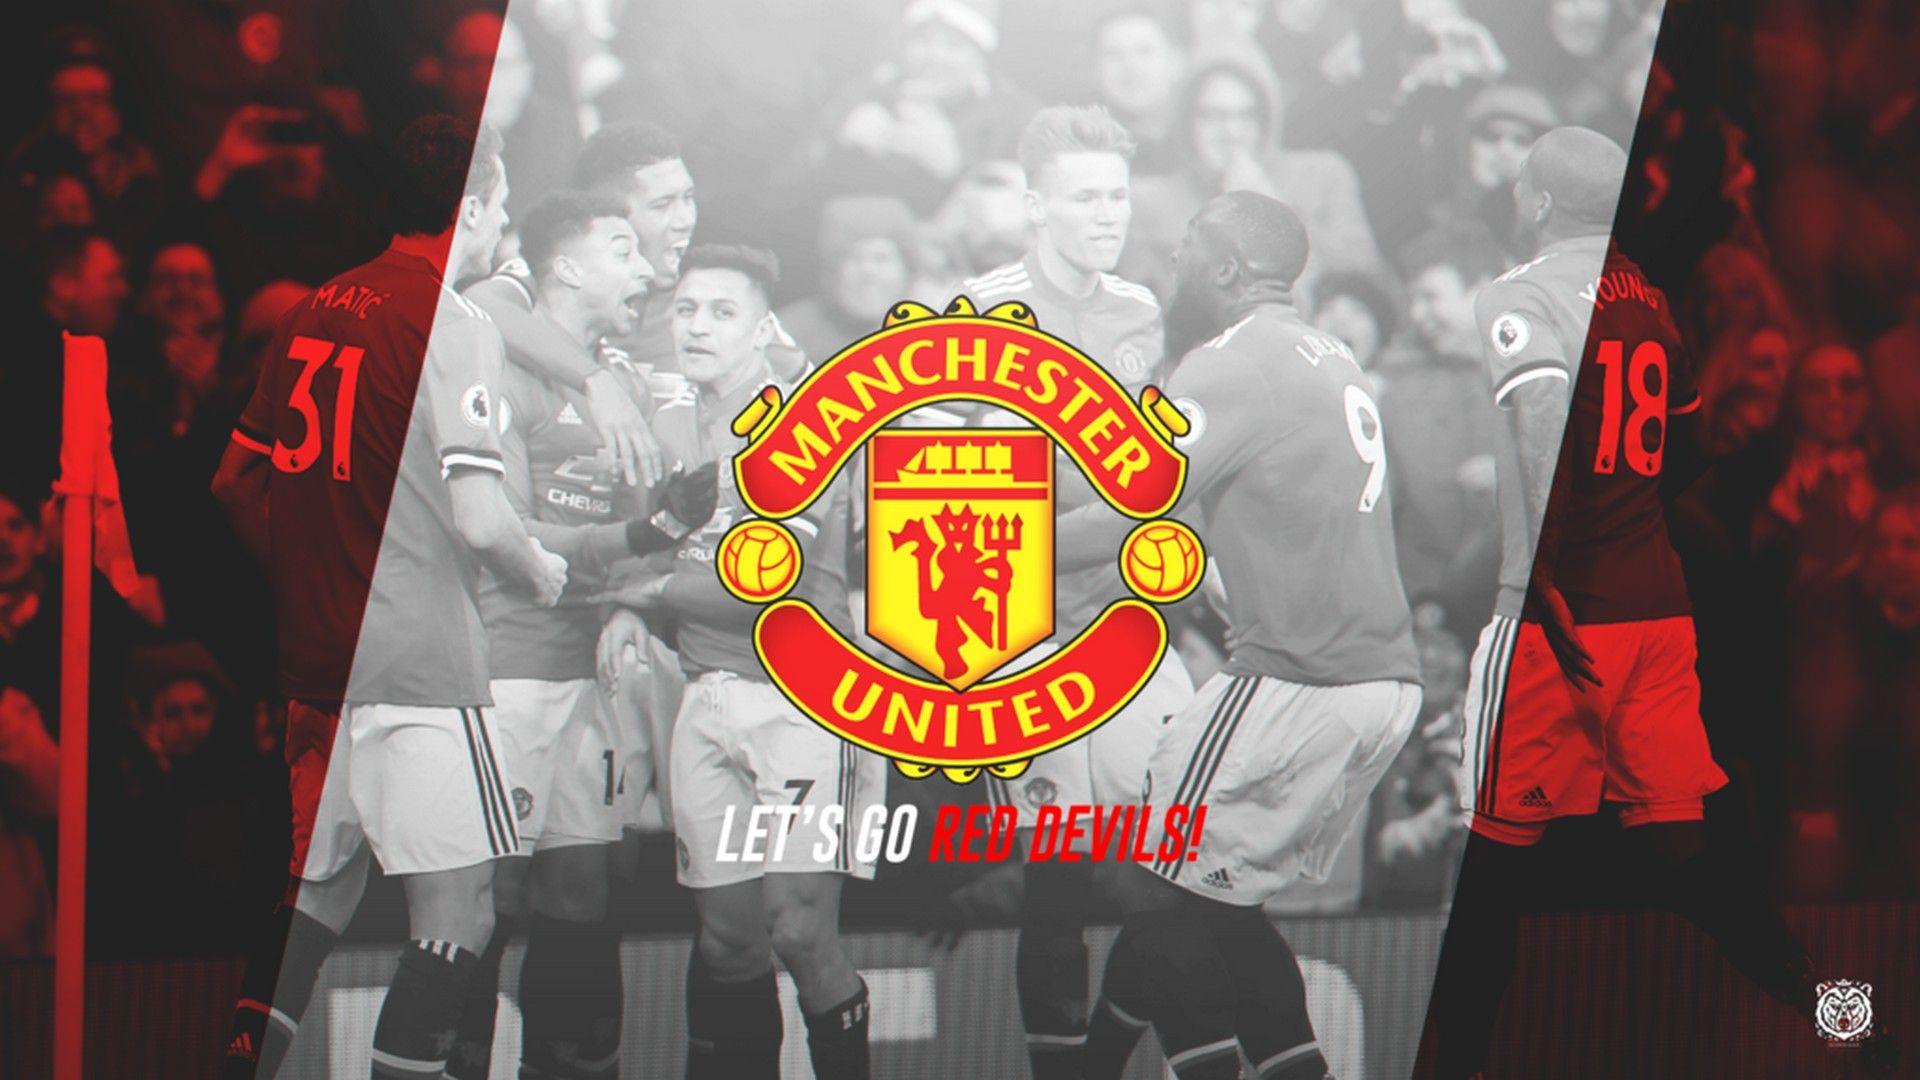 View Lock Screen Manchester United Wallpaper 2021 Pictures